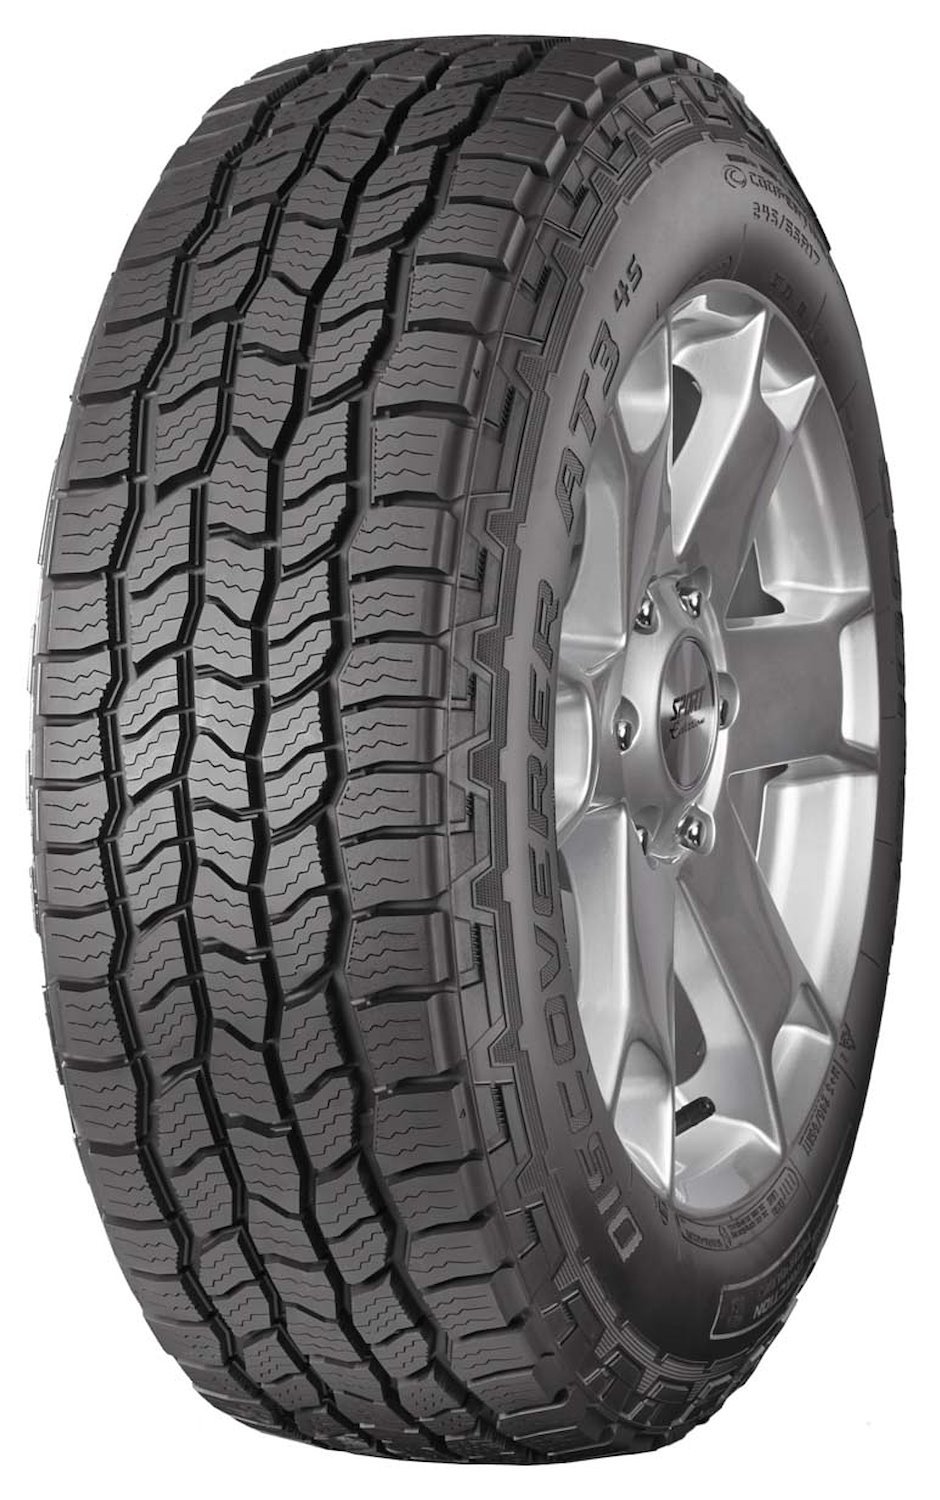 Discoverer AT3 4S All-Terrain Tire, 275/65R18